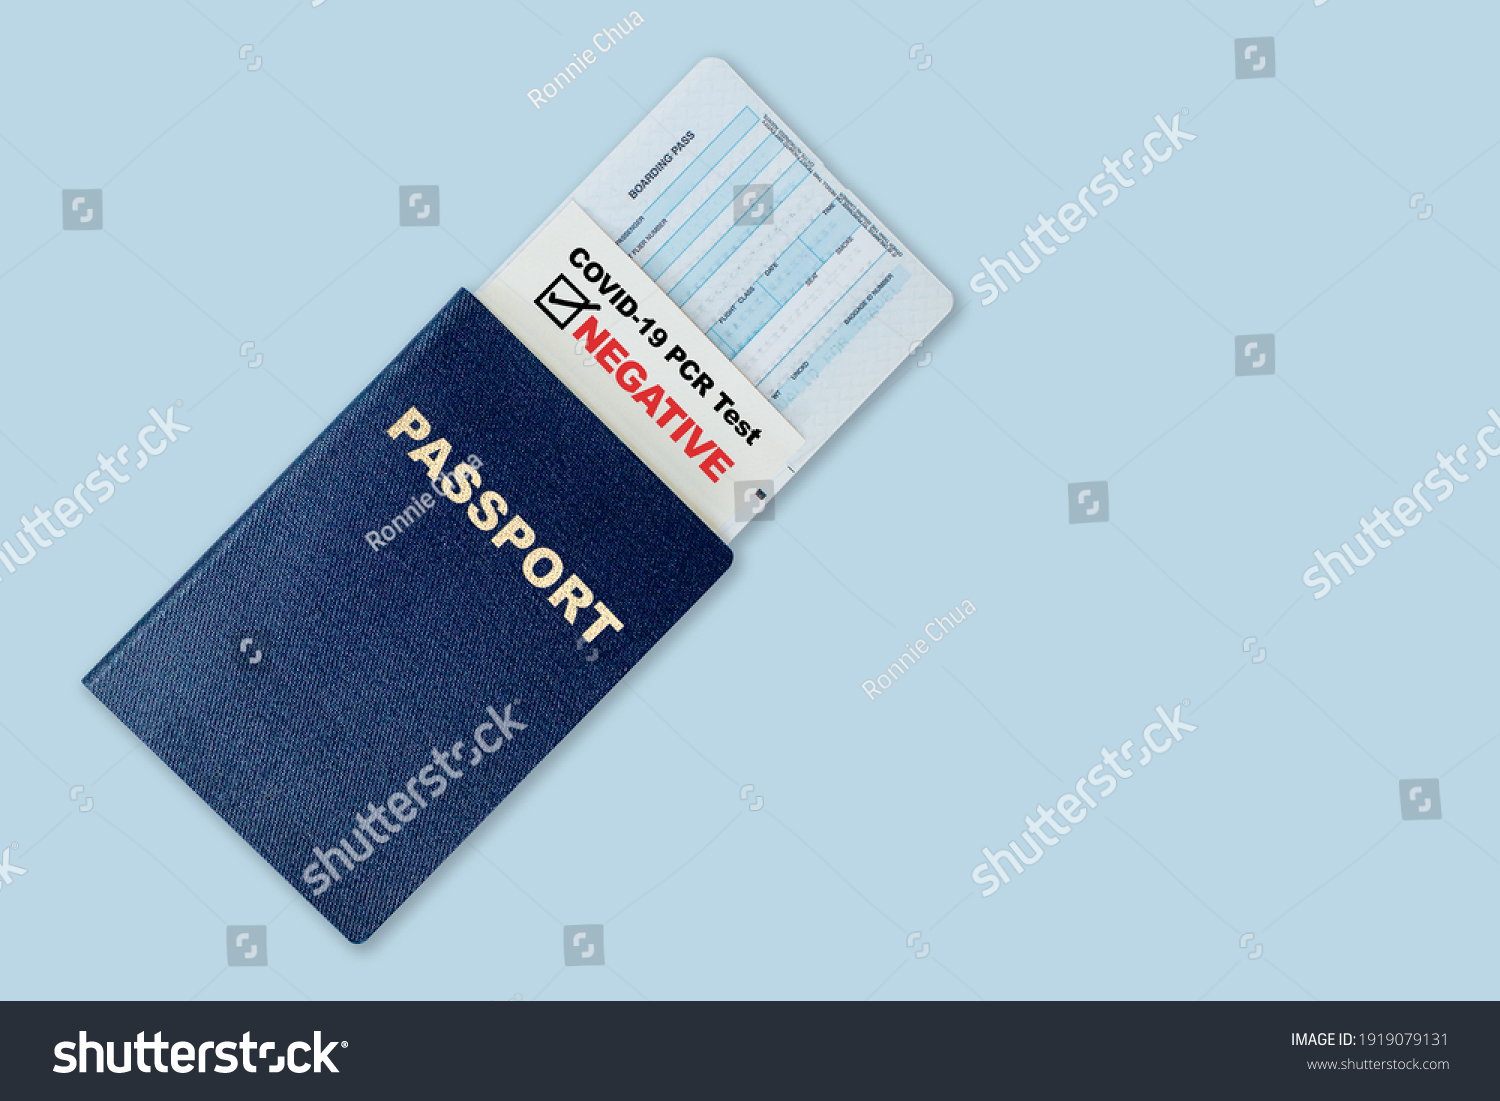 Travel passport, boarding pass and negative test result of COVID-19 PCR test. Concept of new normal future air or land border travel with proof of Coronavirus testing requirement. #1919079131